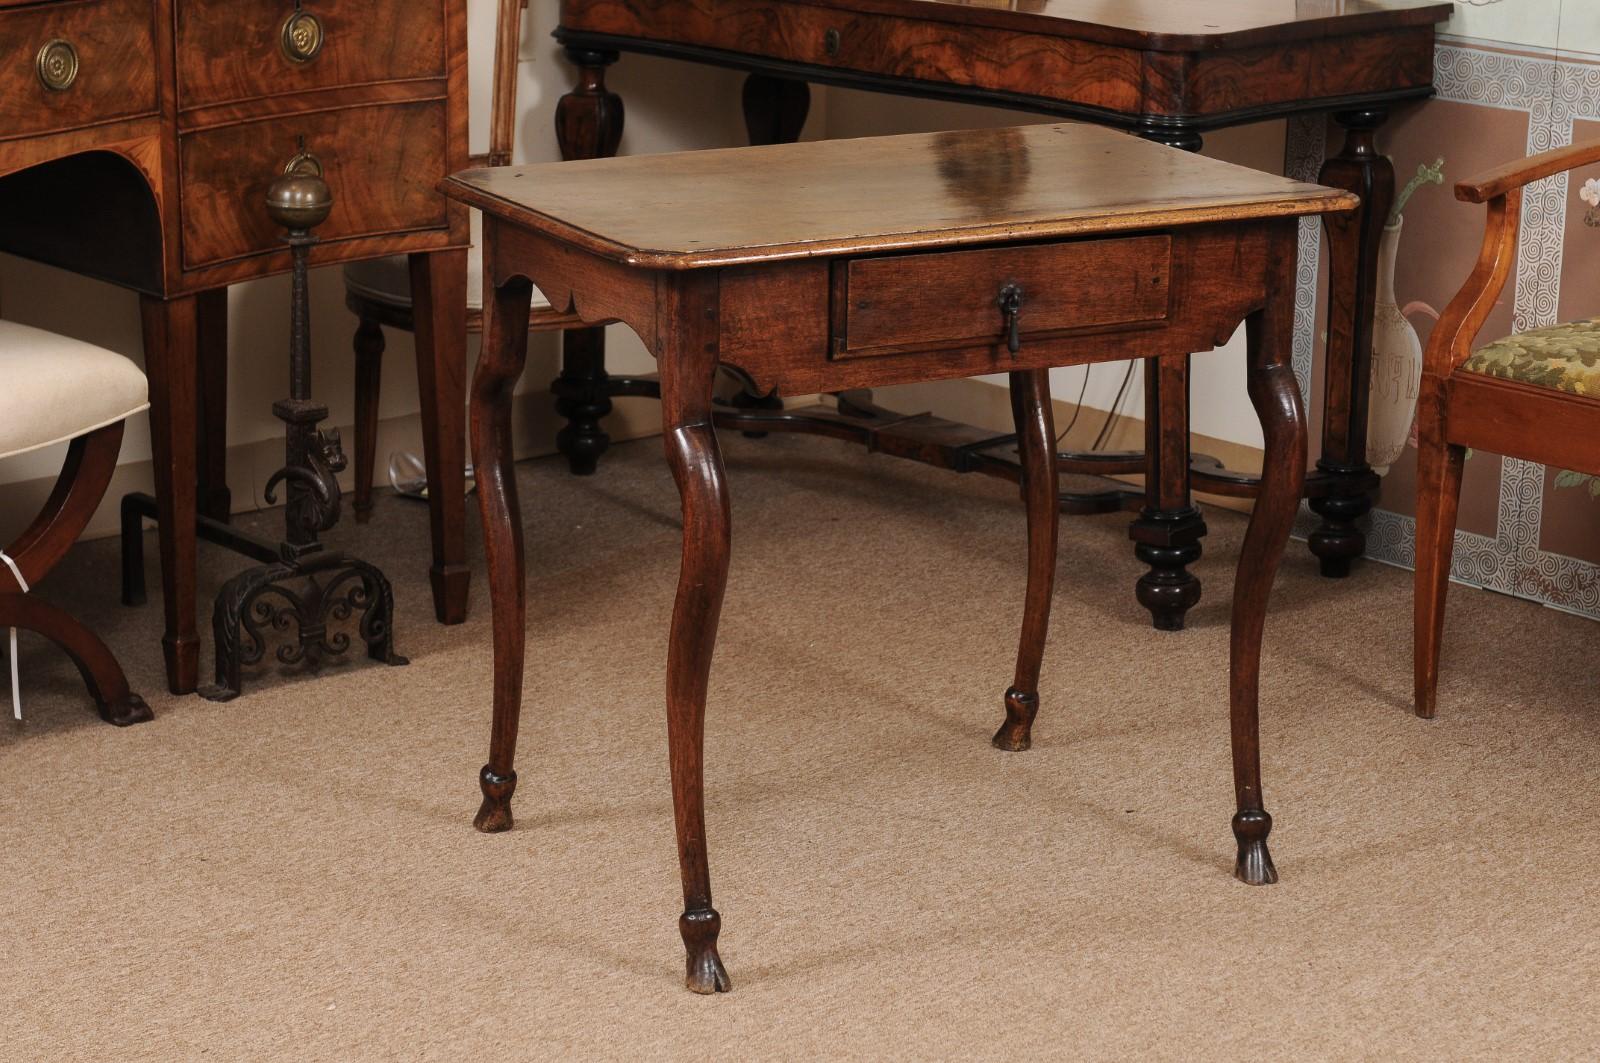 A French Regence walnut table with rectangular top with molded edge, drawer below in apron and unusual cabriole legs ending in carved hoofed feet. The table finished on all sides.